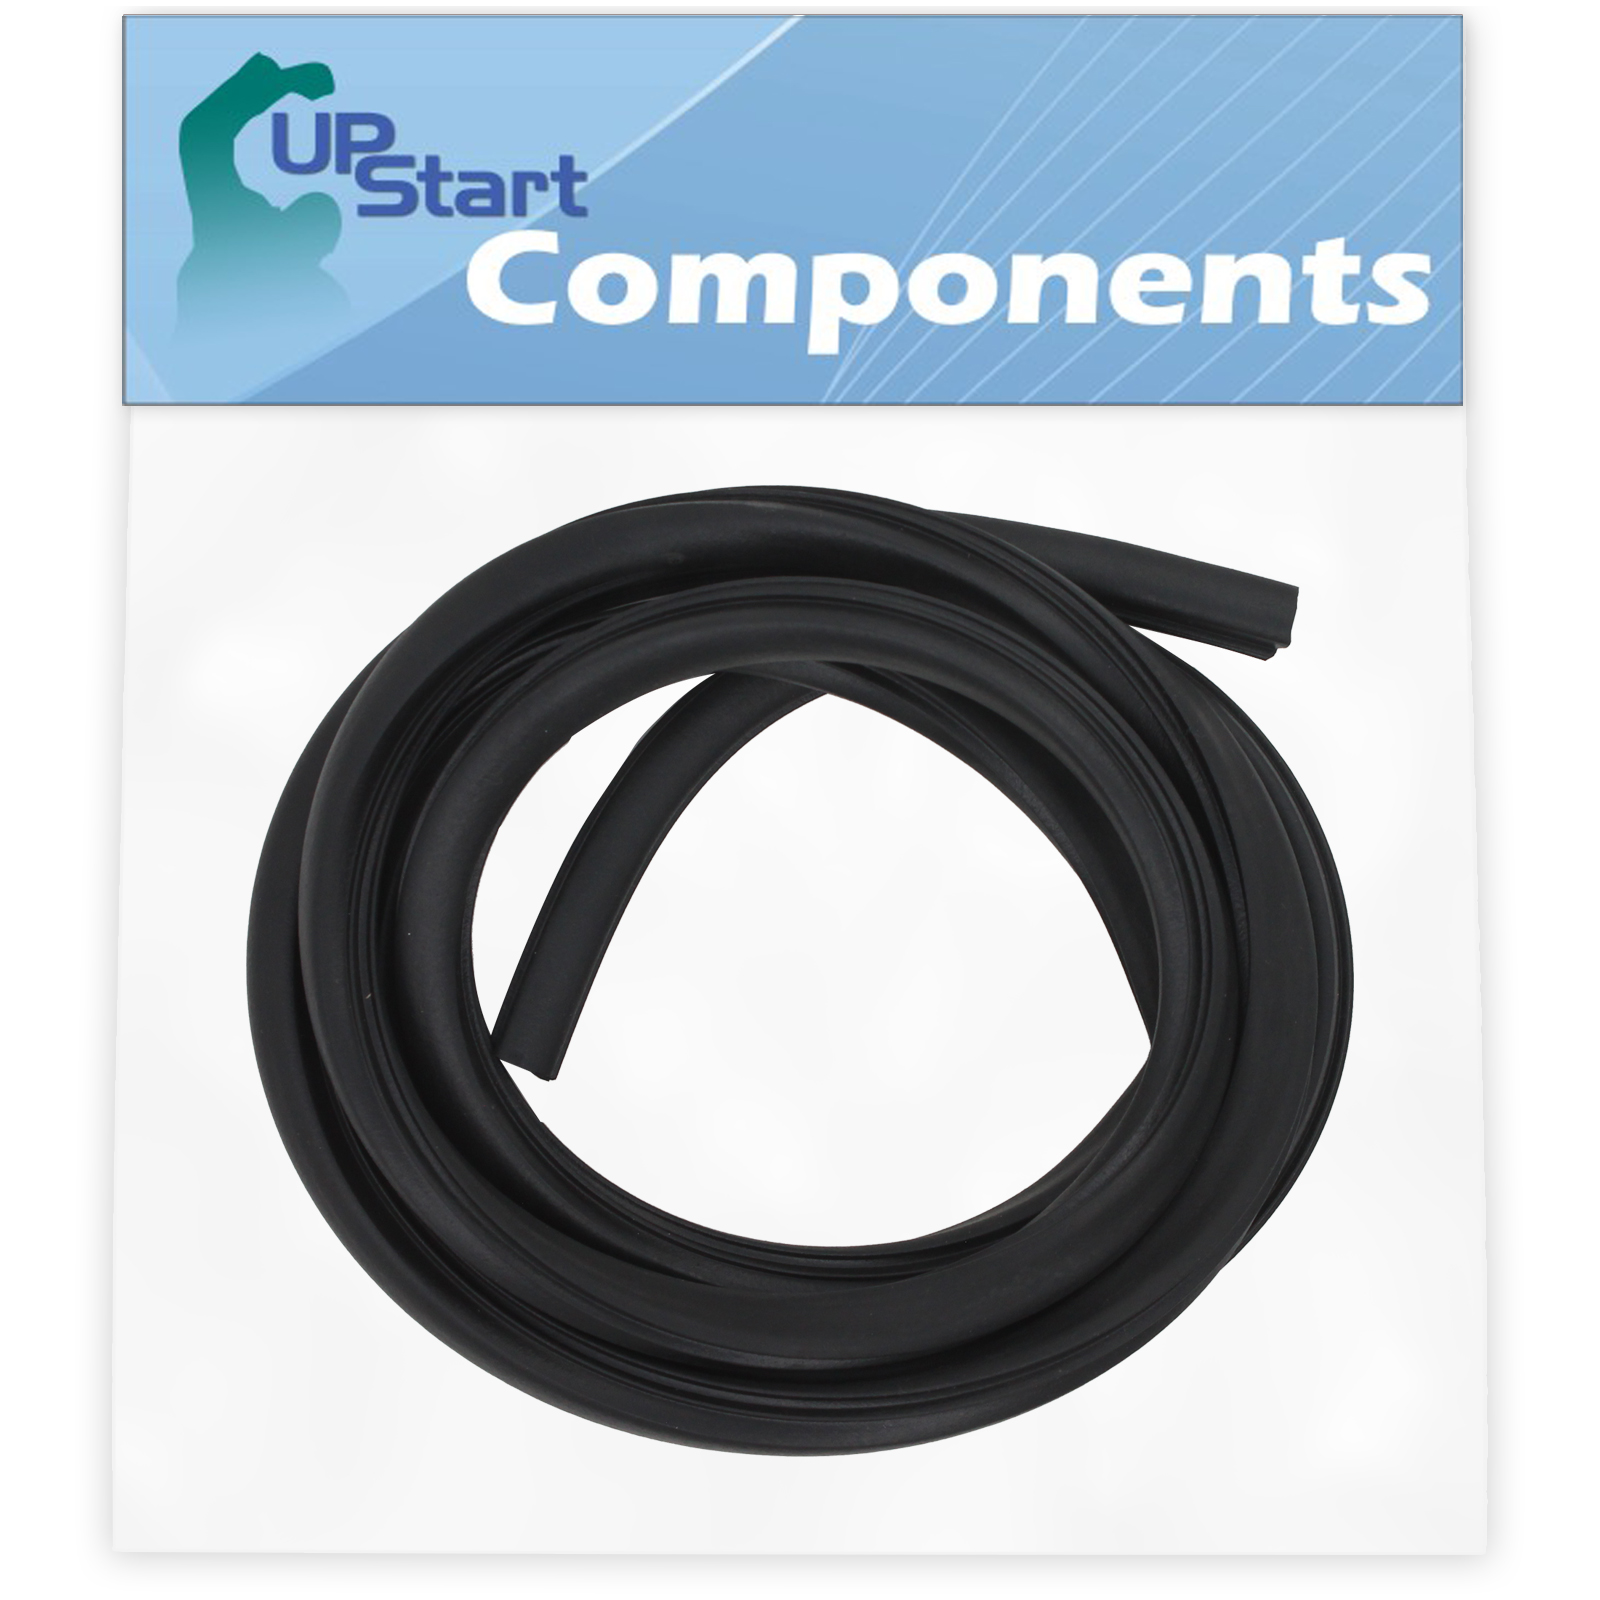 154827601 Dishwasher Tub Gasket Replacement for Frigidaire GLDB653JT0 Dishwasher - Compatible with 154827601 Tub Gasket - UpStart Components Brand - image 1 of 2